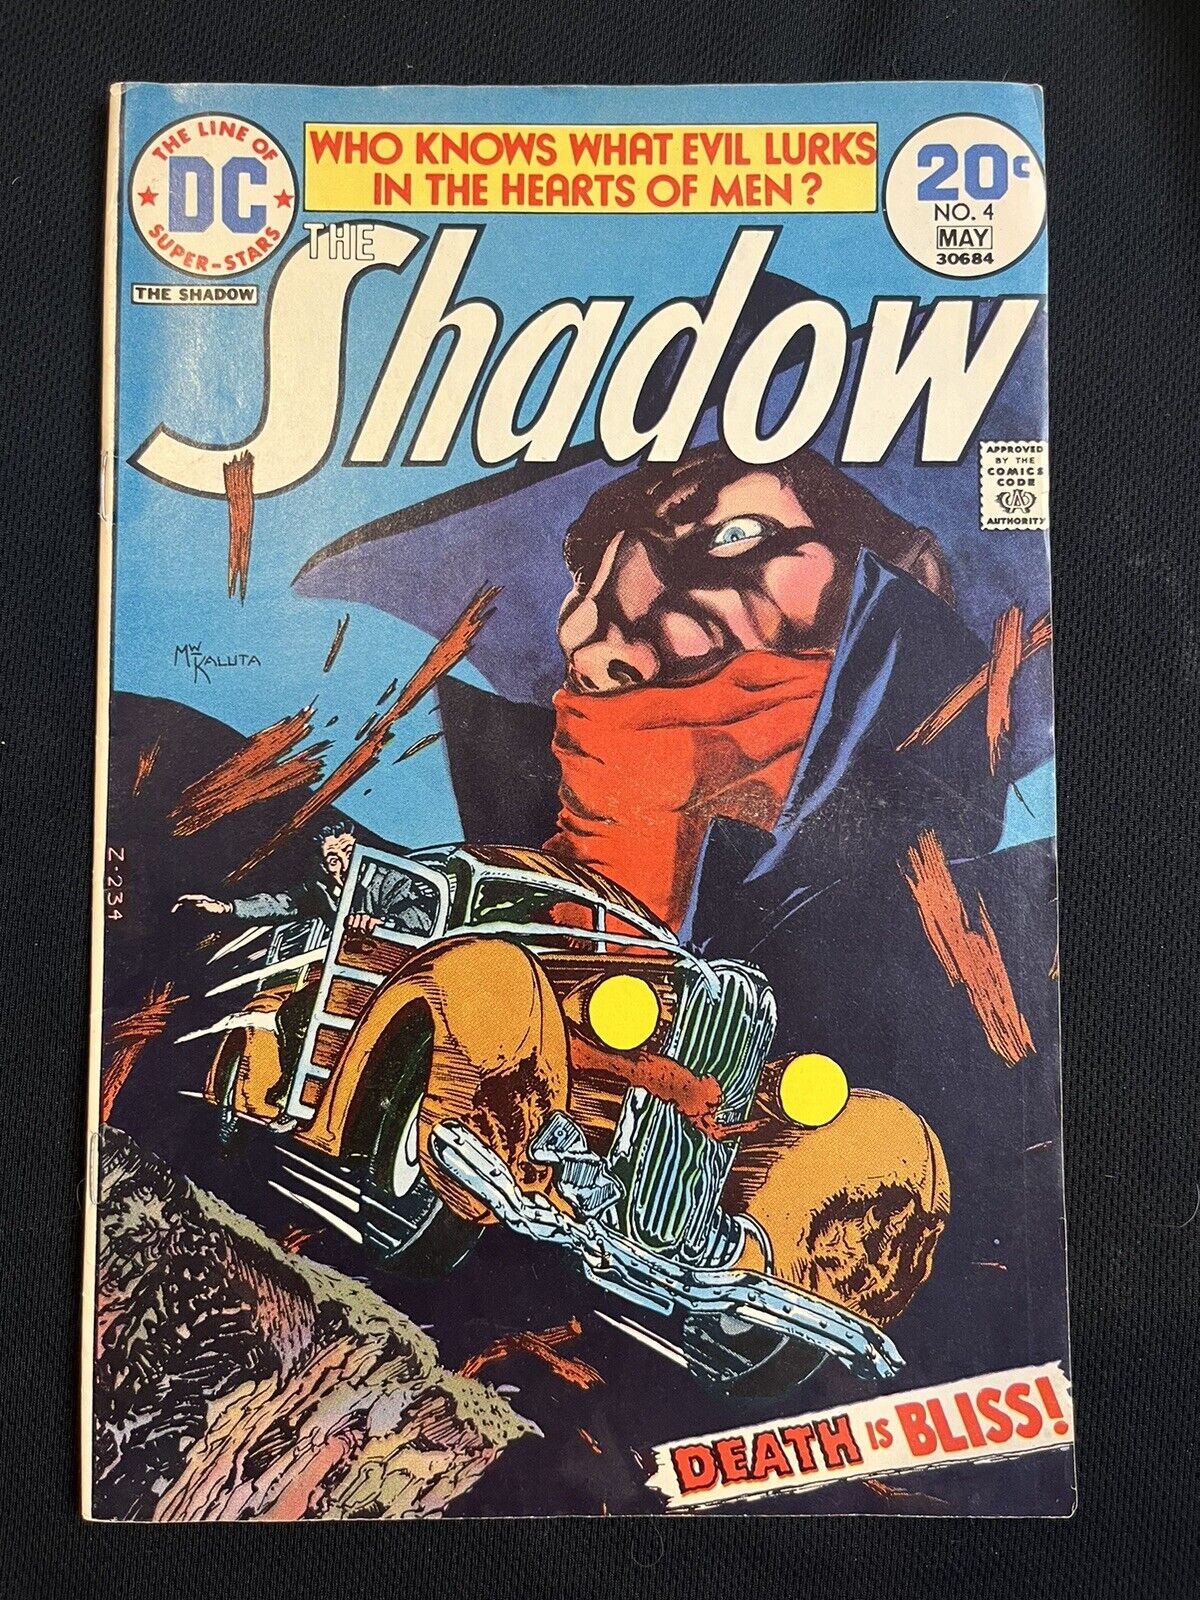 THE SHADOW #4 DC 1973 COMIC BOOK DEATH IS BLISS FINE